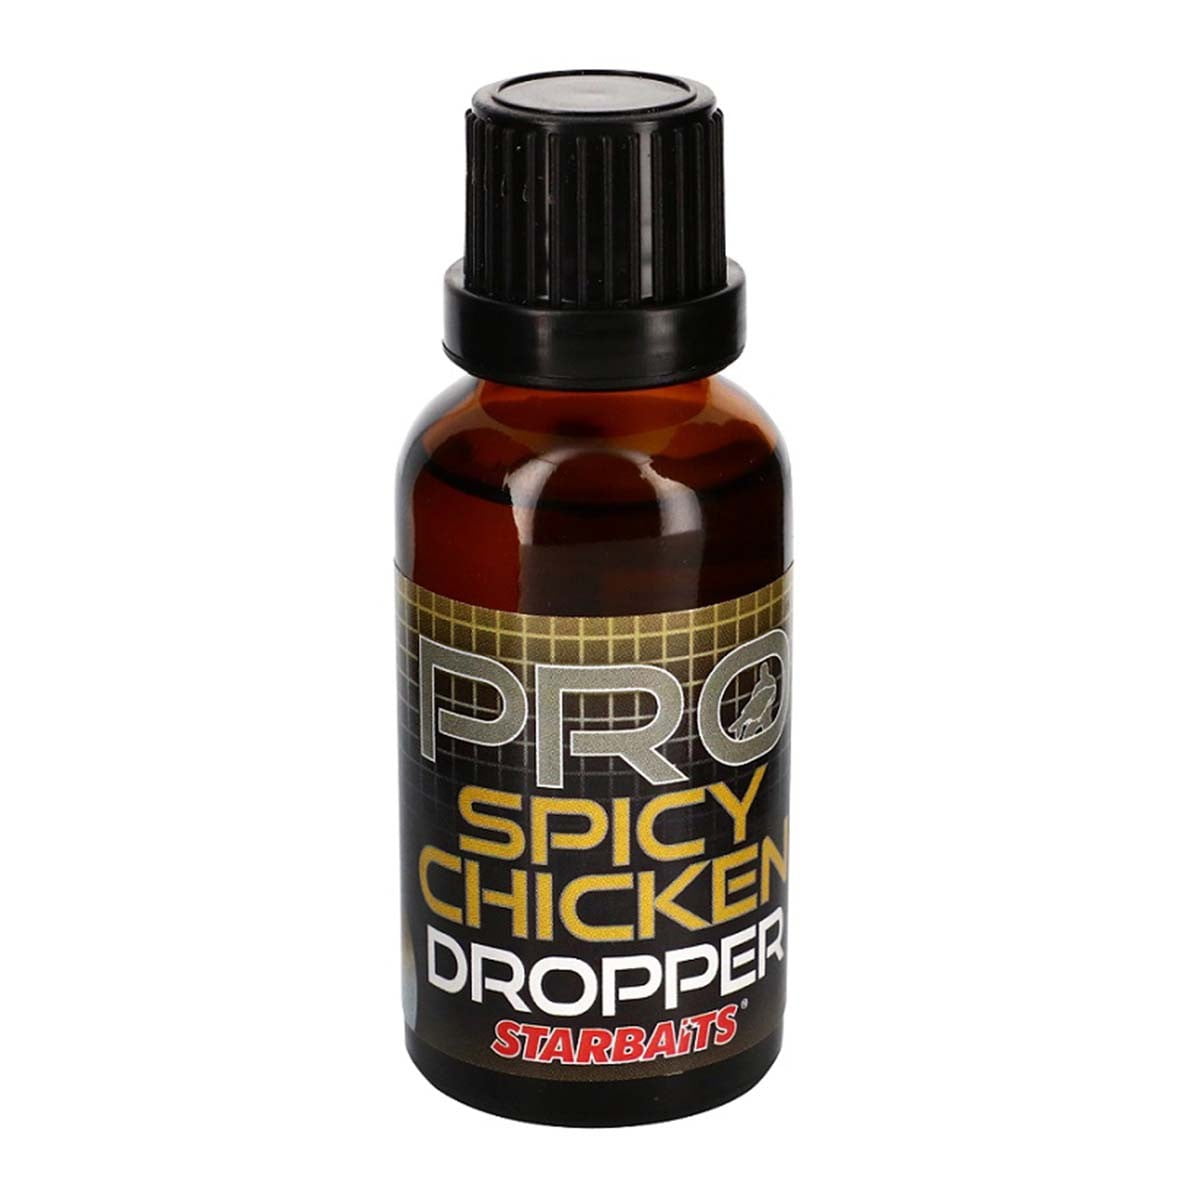 Starbaits Drooper Spicy Chicken 30ml